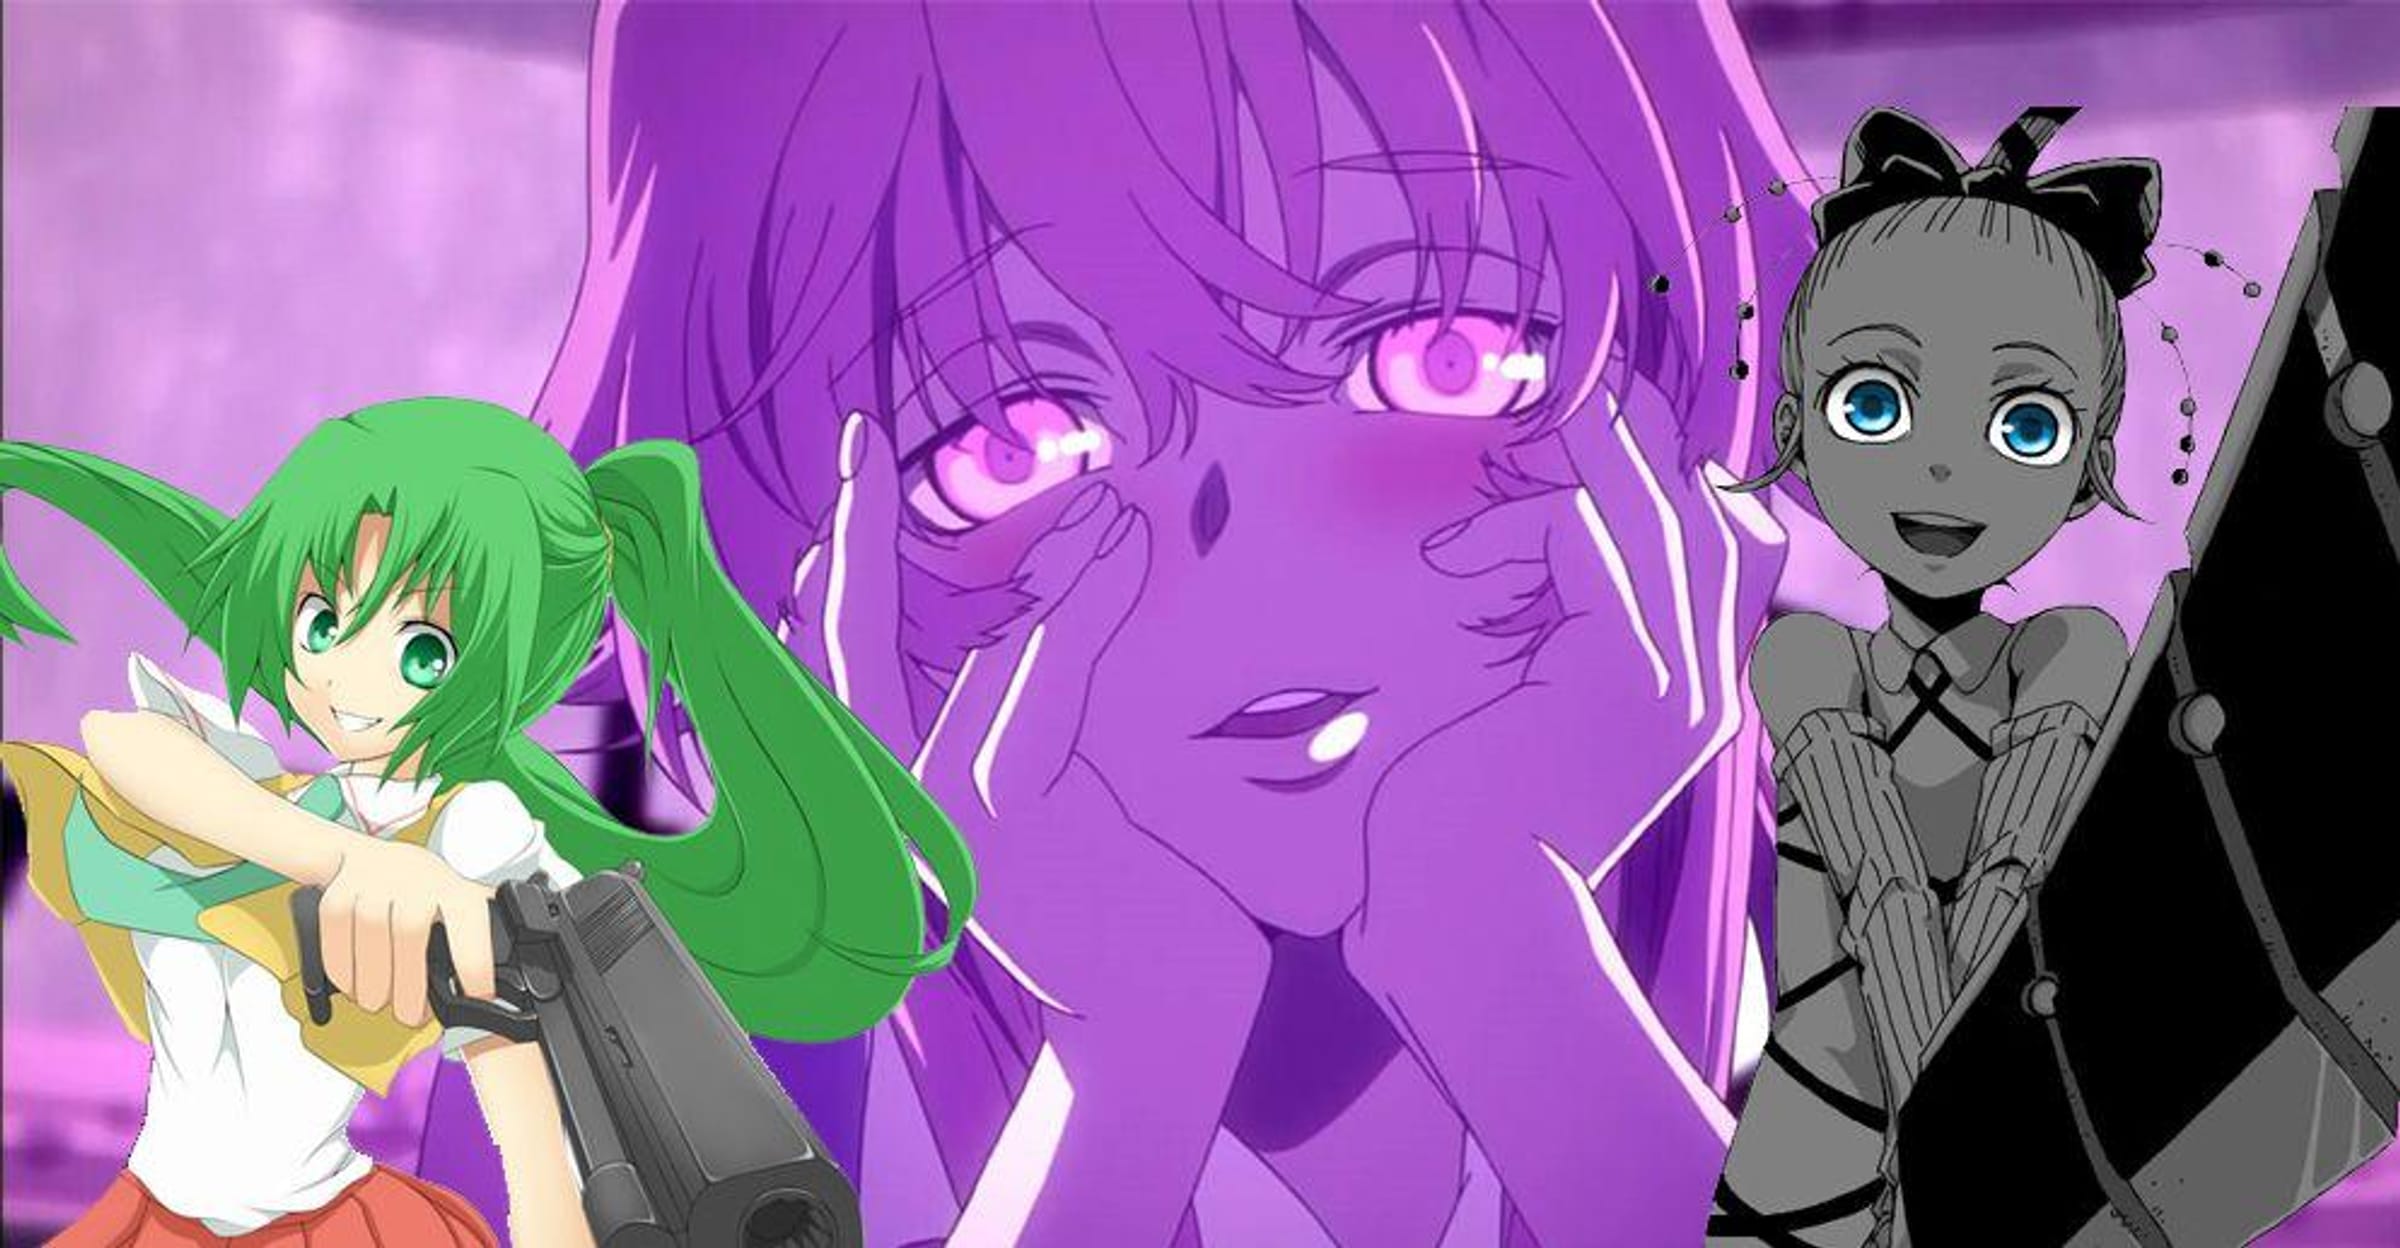 15 Cute Anime Girls Who Are Actually Sadistic & Violent Individuals